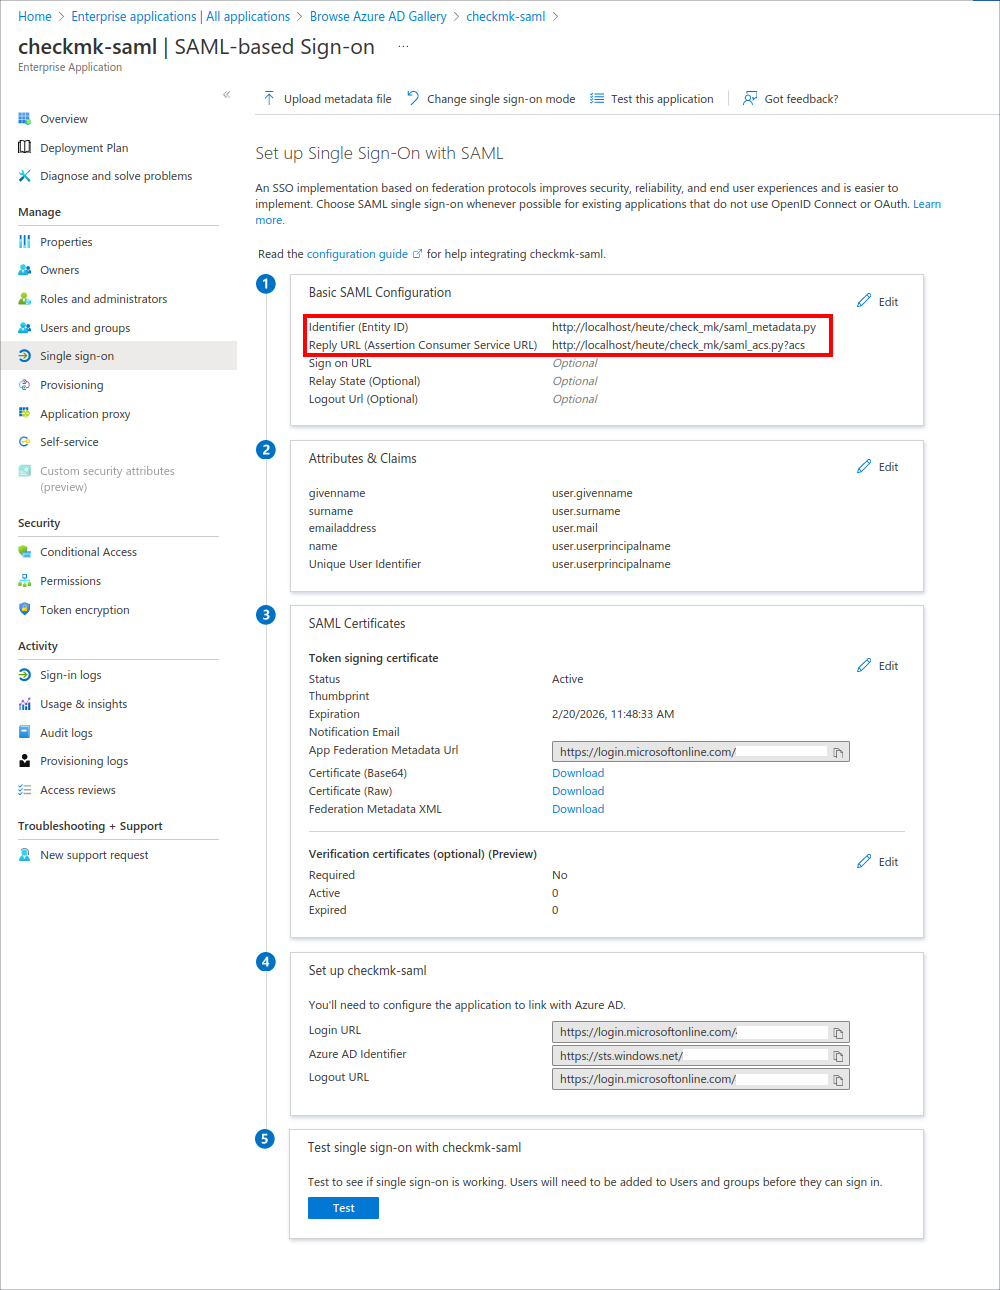 Overview of application data in Azure AD.